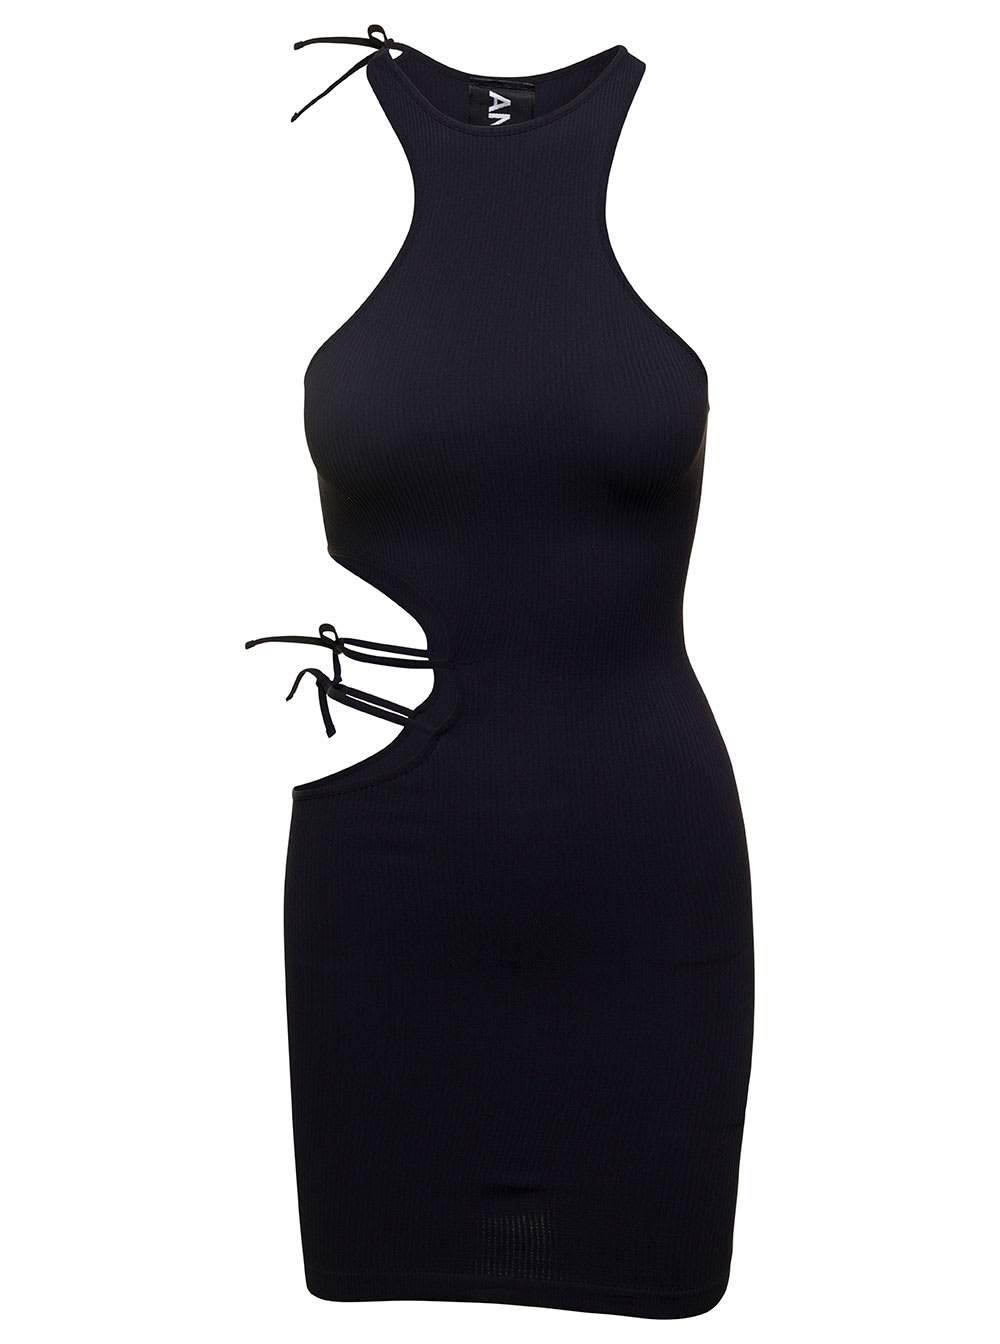 ANDREÄDAMO BLACK SLEEVELESS DRESS WITH CUT-OUT DETAIL AND LACES IN POLYAMIDE WOMAN